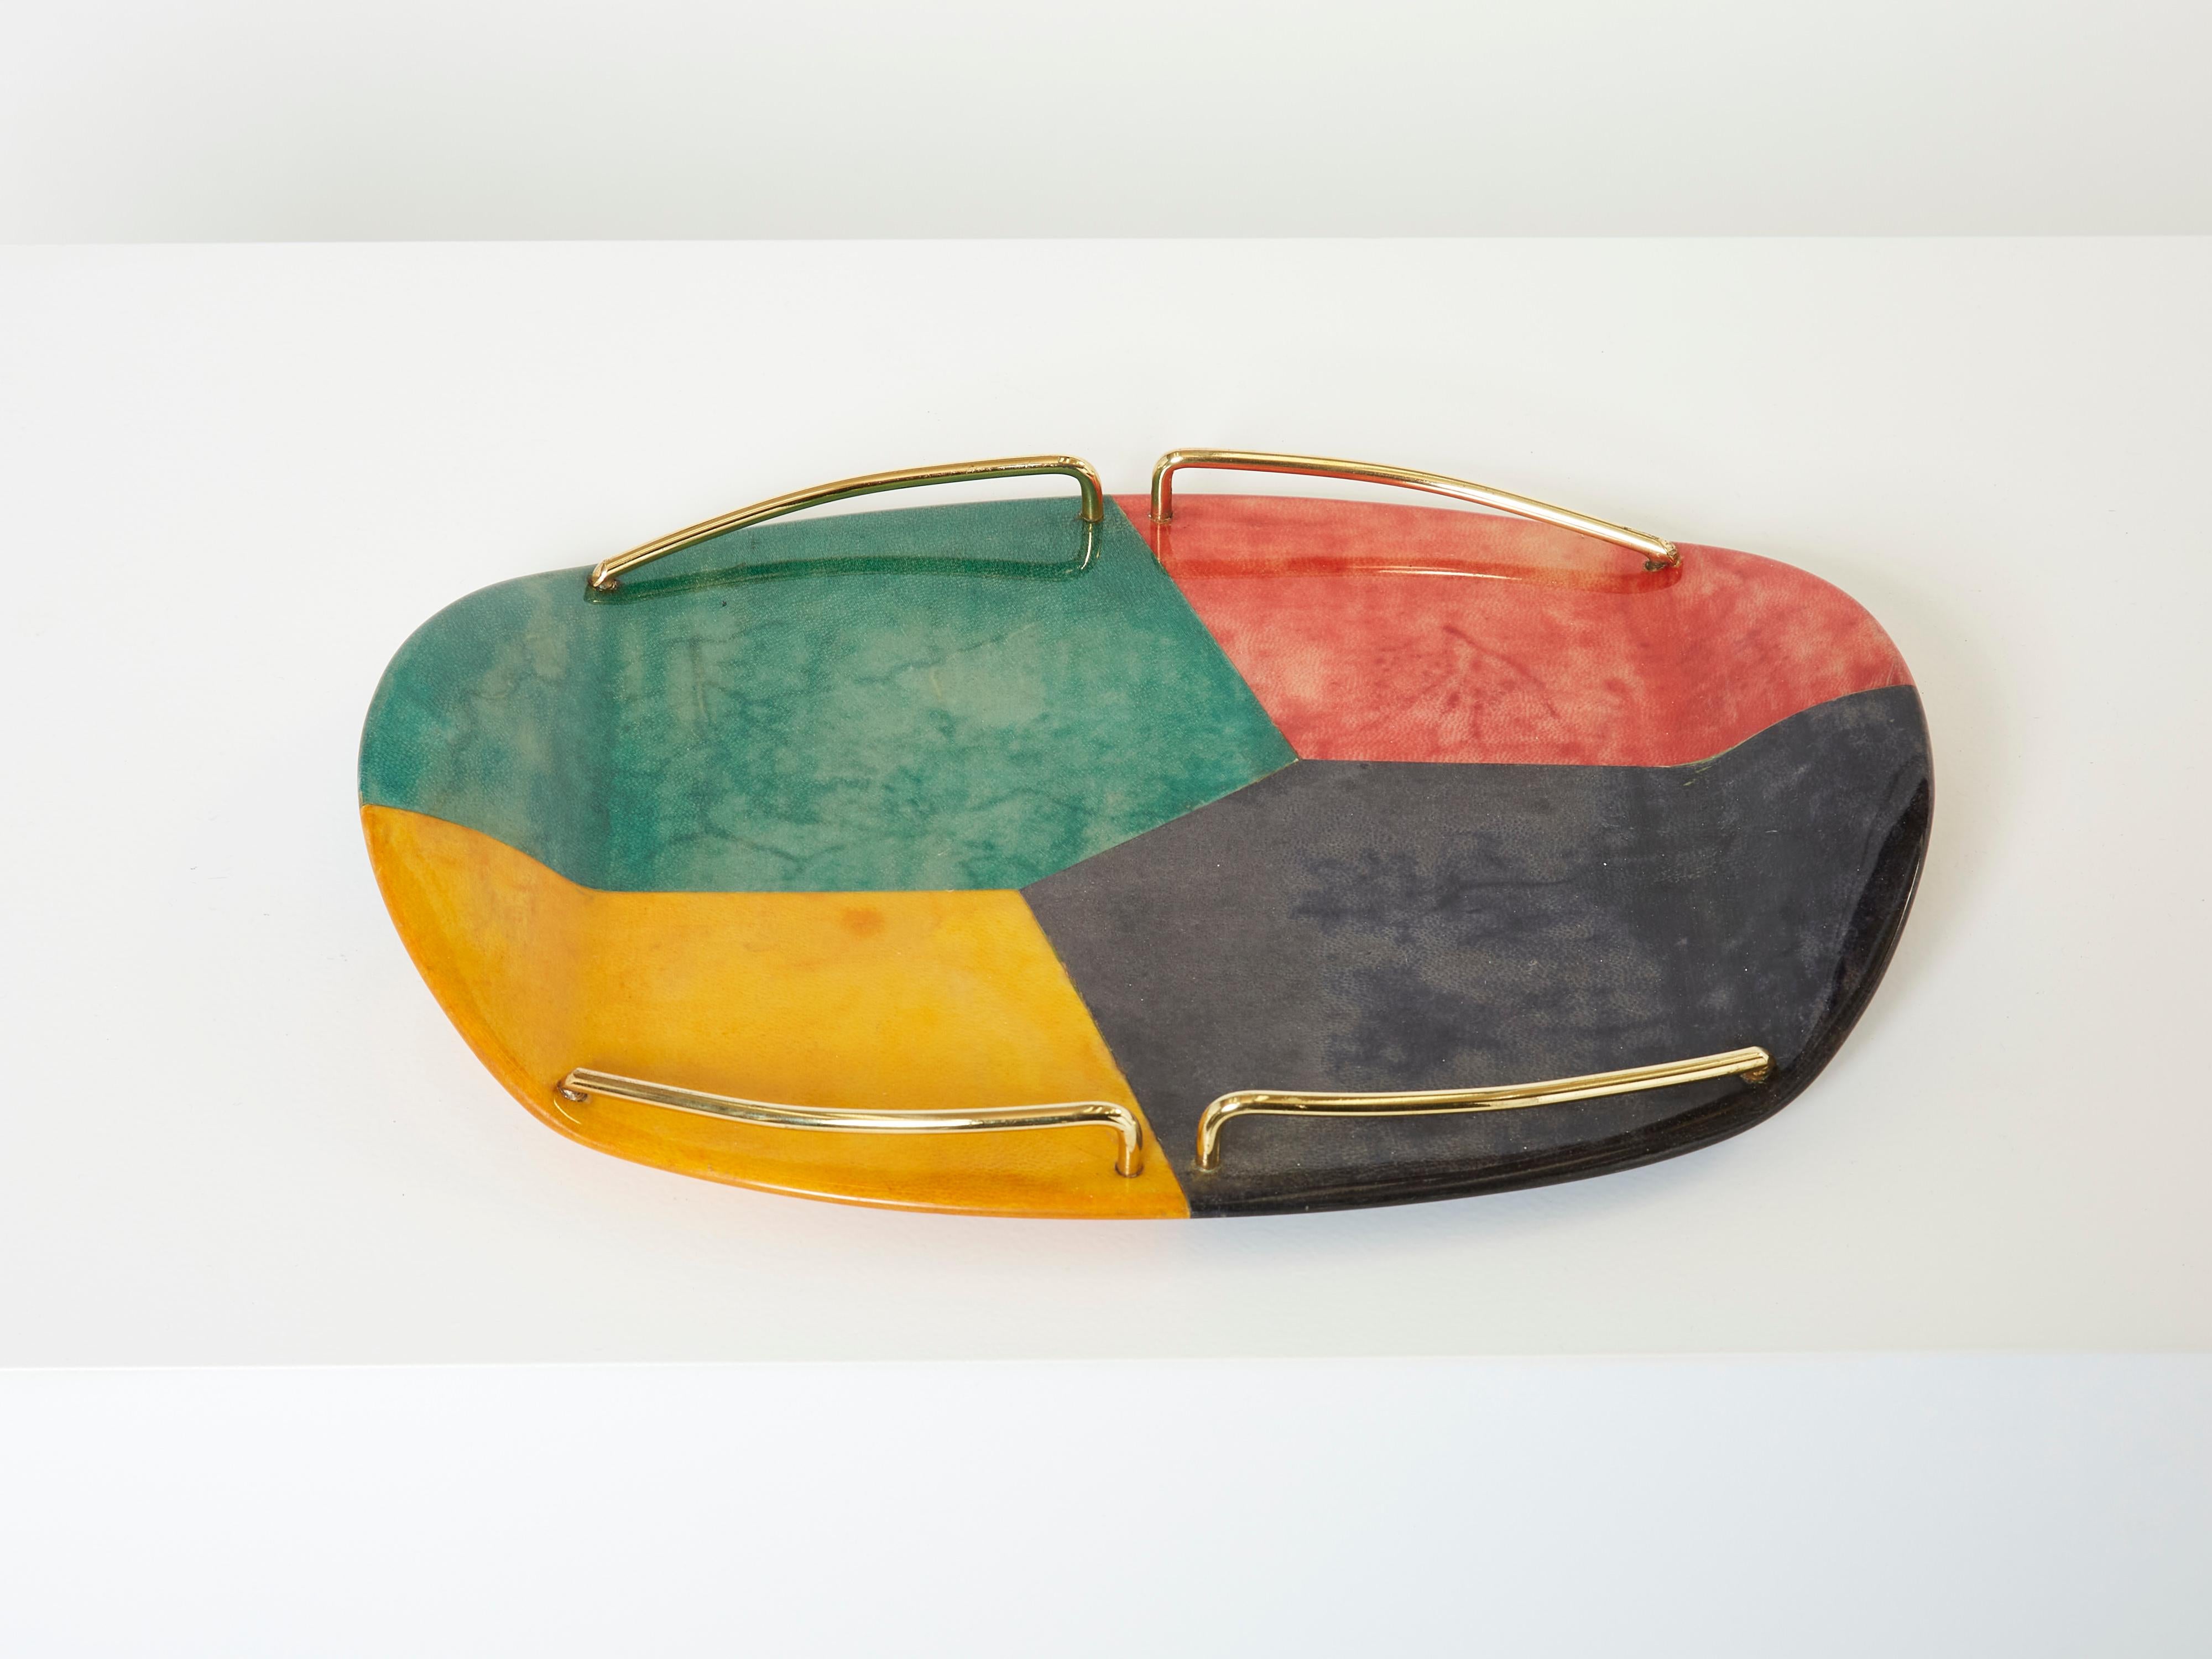 This is a beautiful barware serving tray designed by Aldo Tura for Macabo Cusano Milanino in Milan in the early 1960s. Rounded shape with a brass gallery and varnished goatskin parchment patchwork, in rich shades of yellow, red, green and black,